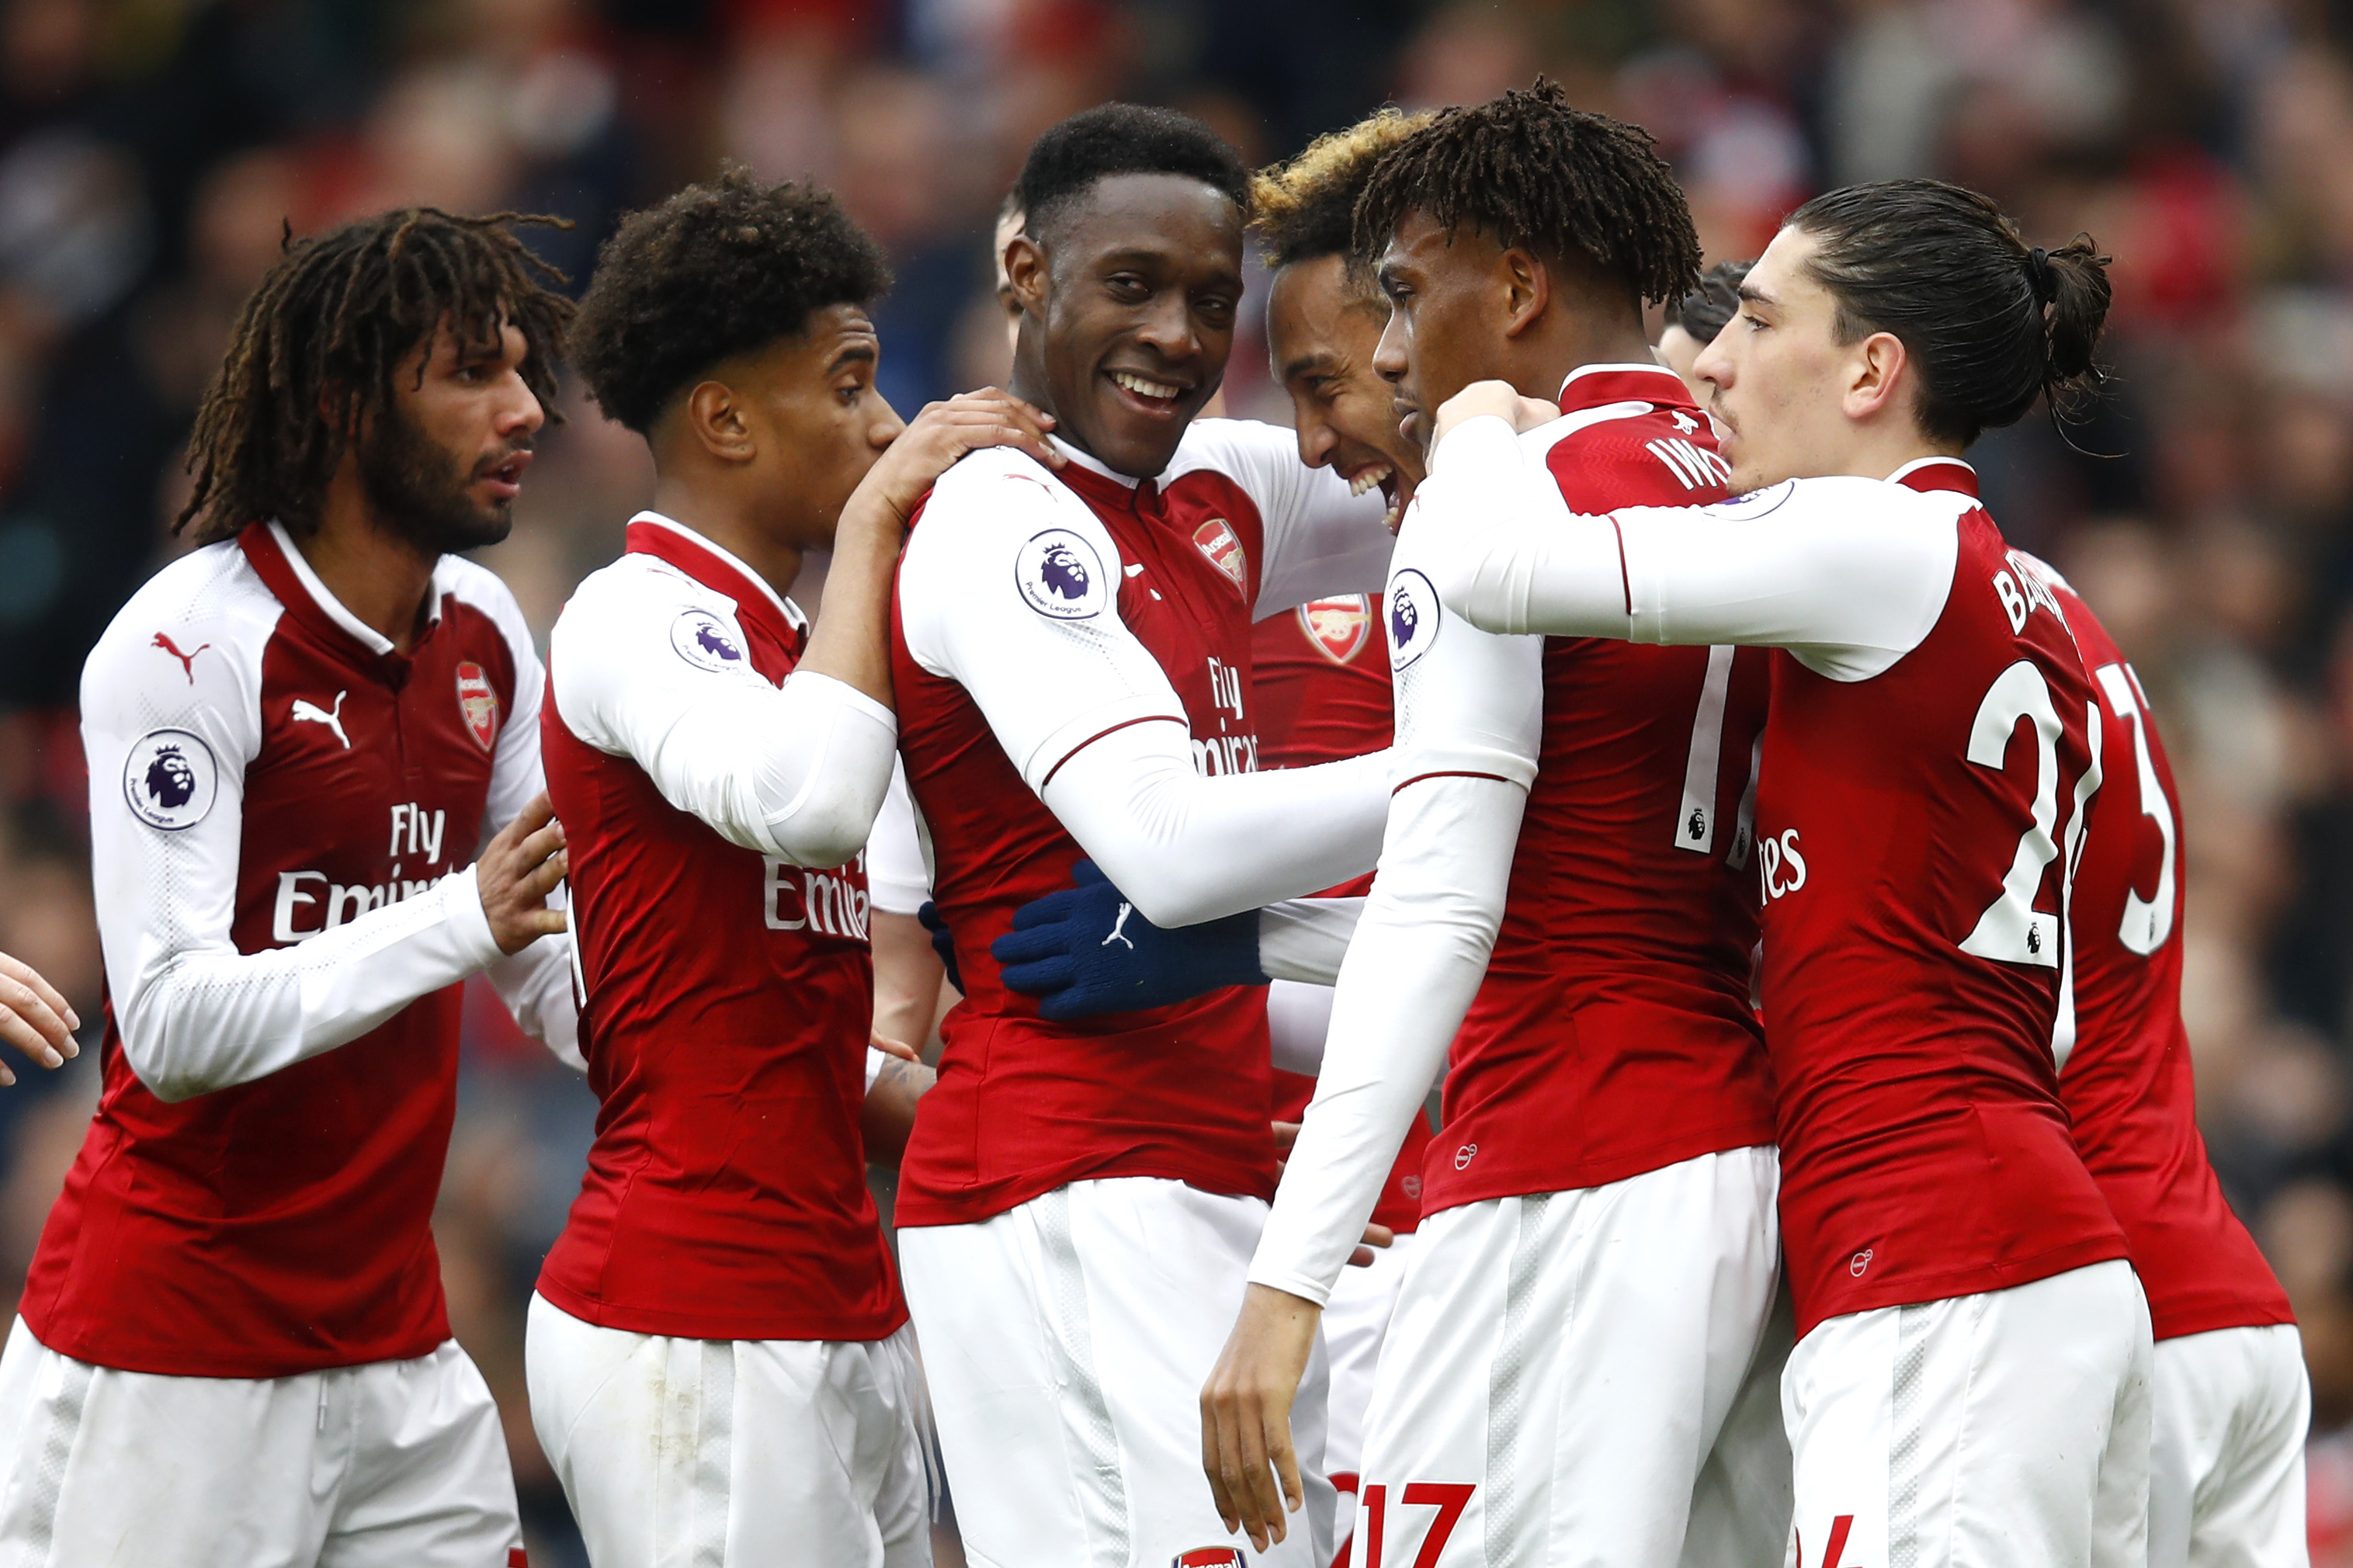 LONDON, ENGLAND - APRIL 08:  Pierre-Emerick Aubameyang of Arsenal celebrates with team mates after scoring his sides first goal during the Premier League match between Arsenal and Southampton at Emirates Stadium on April 8, 2018 in London, England.  (Photo by Julian Finney/Getty Images)